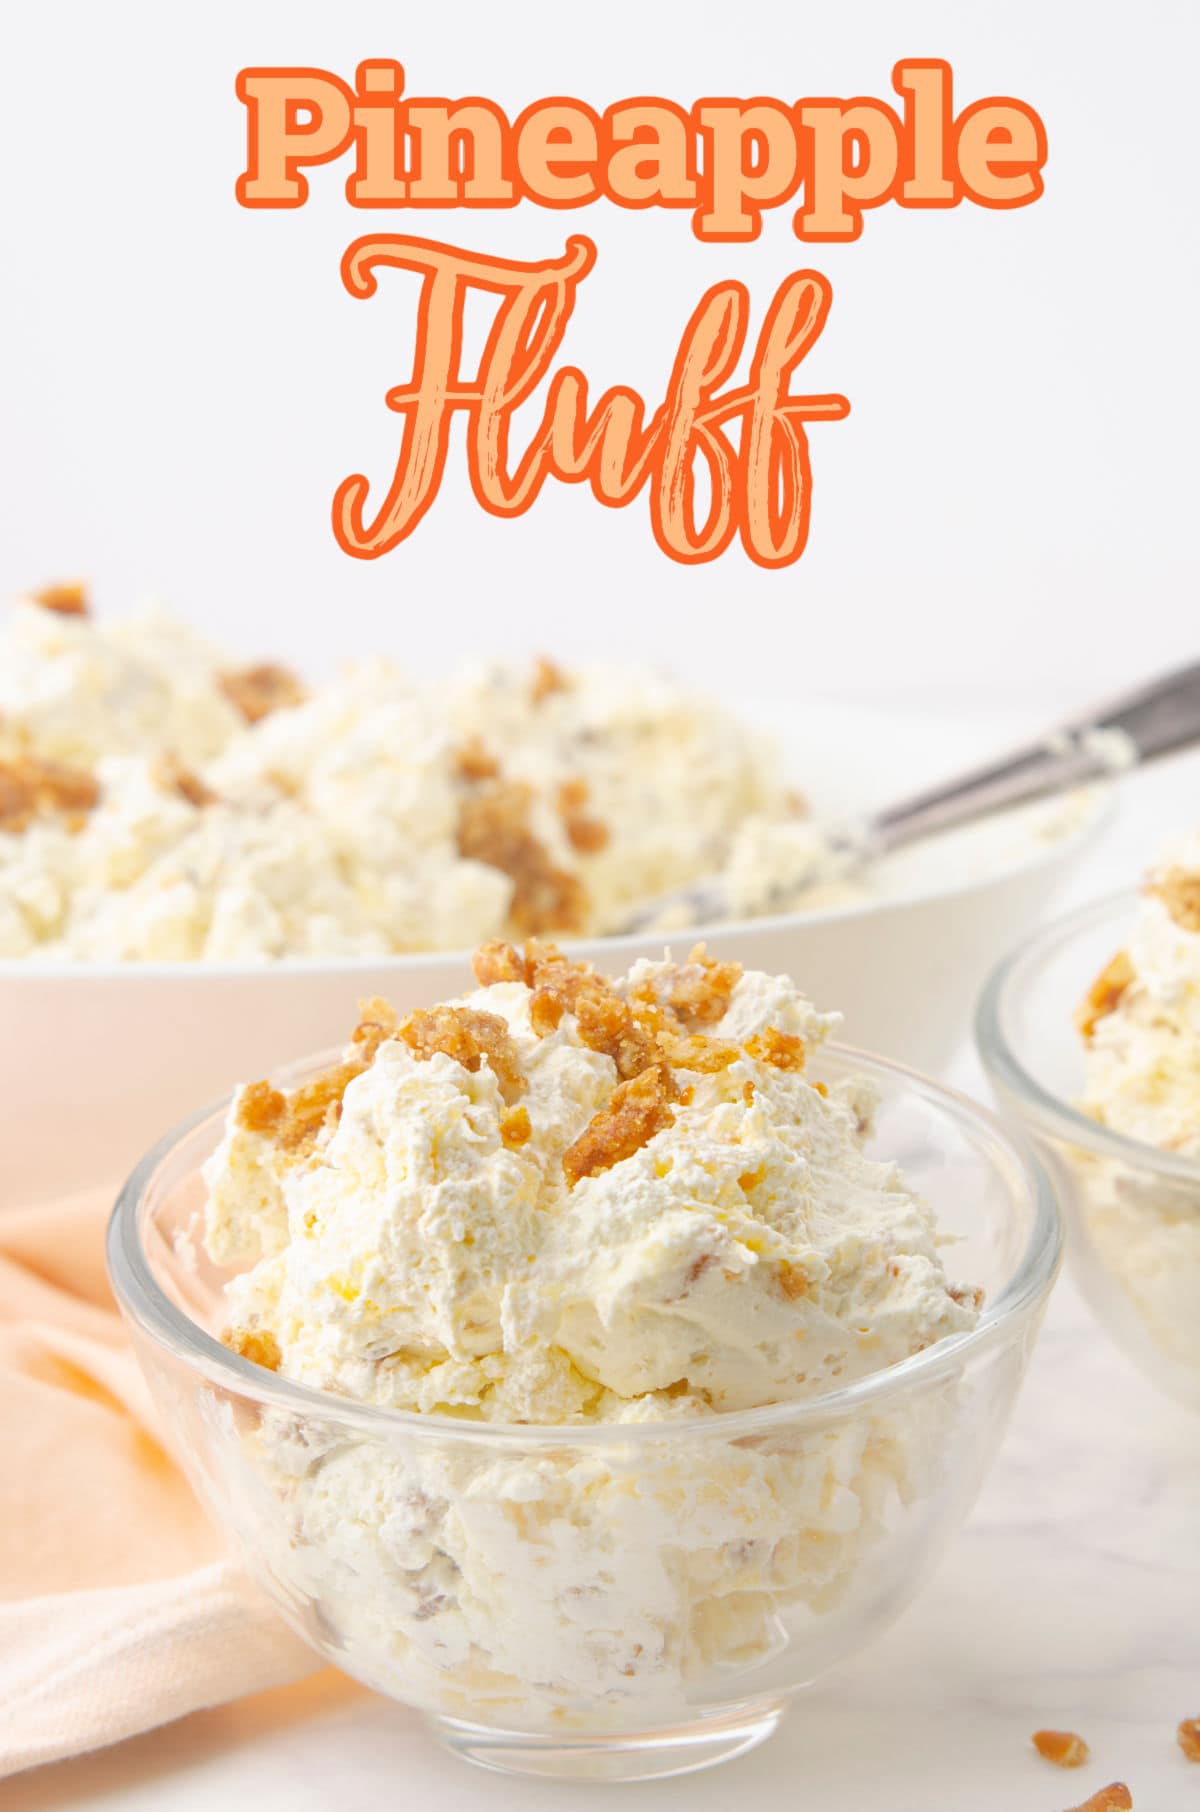 A bowl of creamy dessert with a title text overlay.